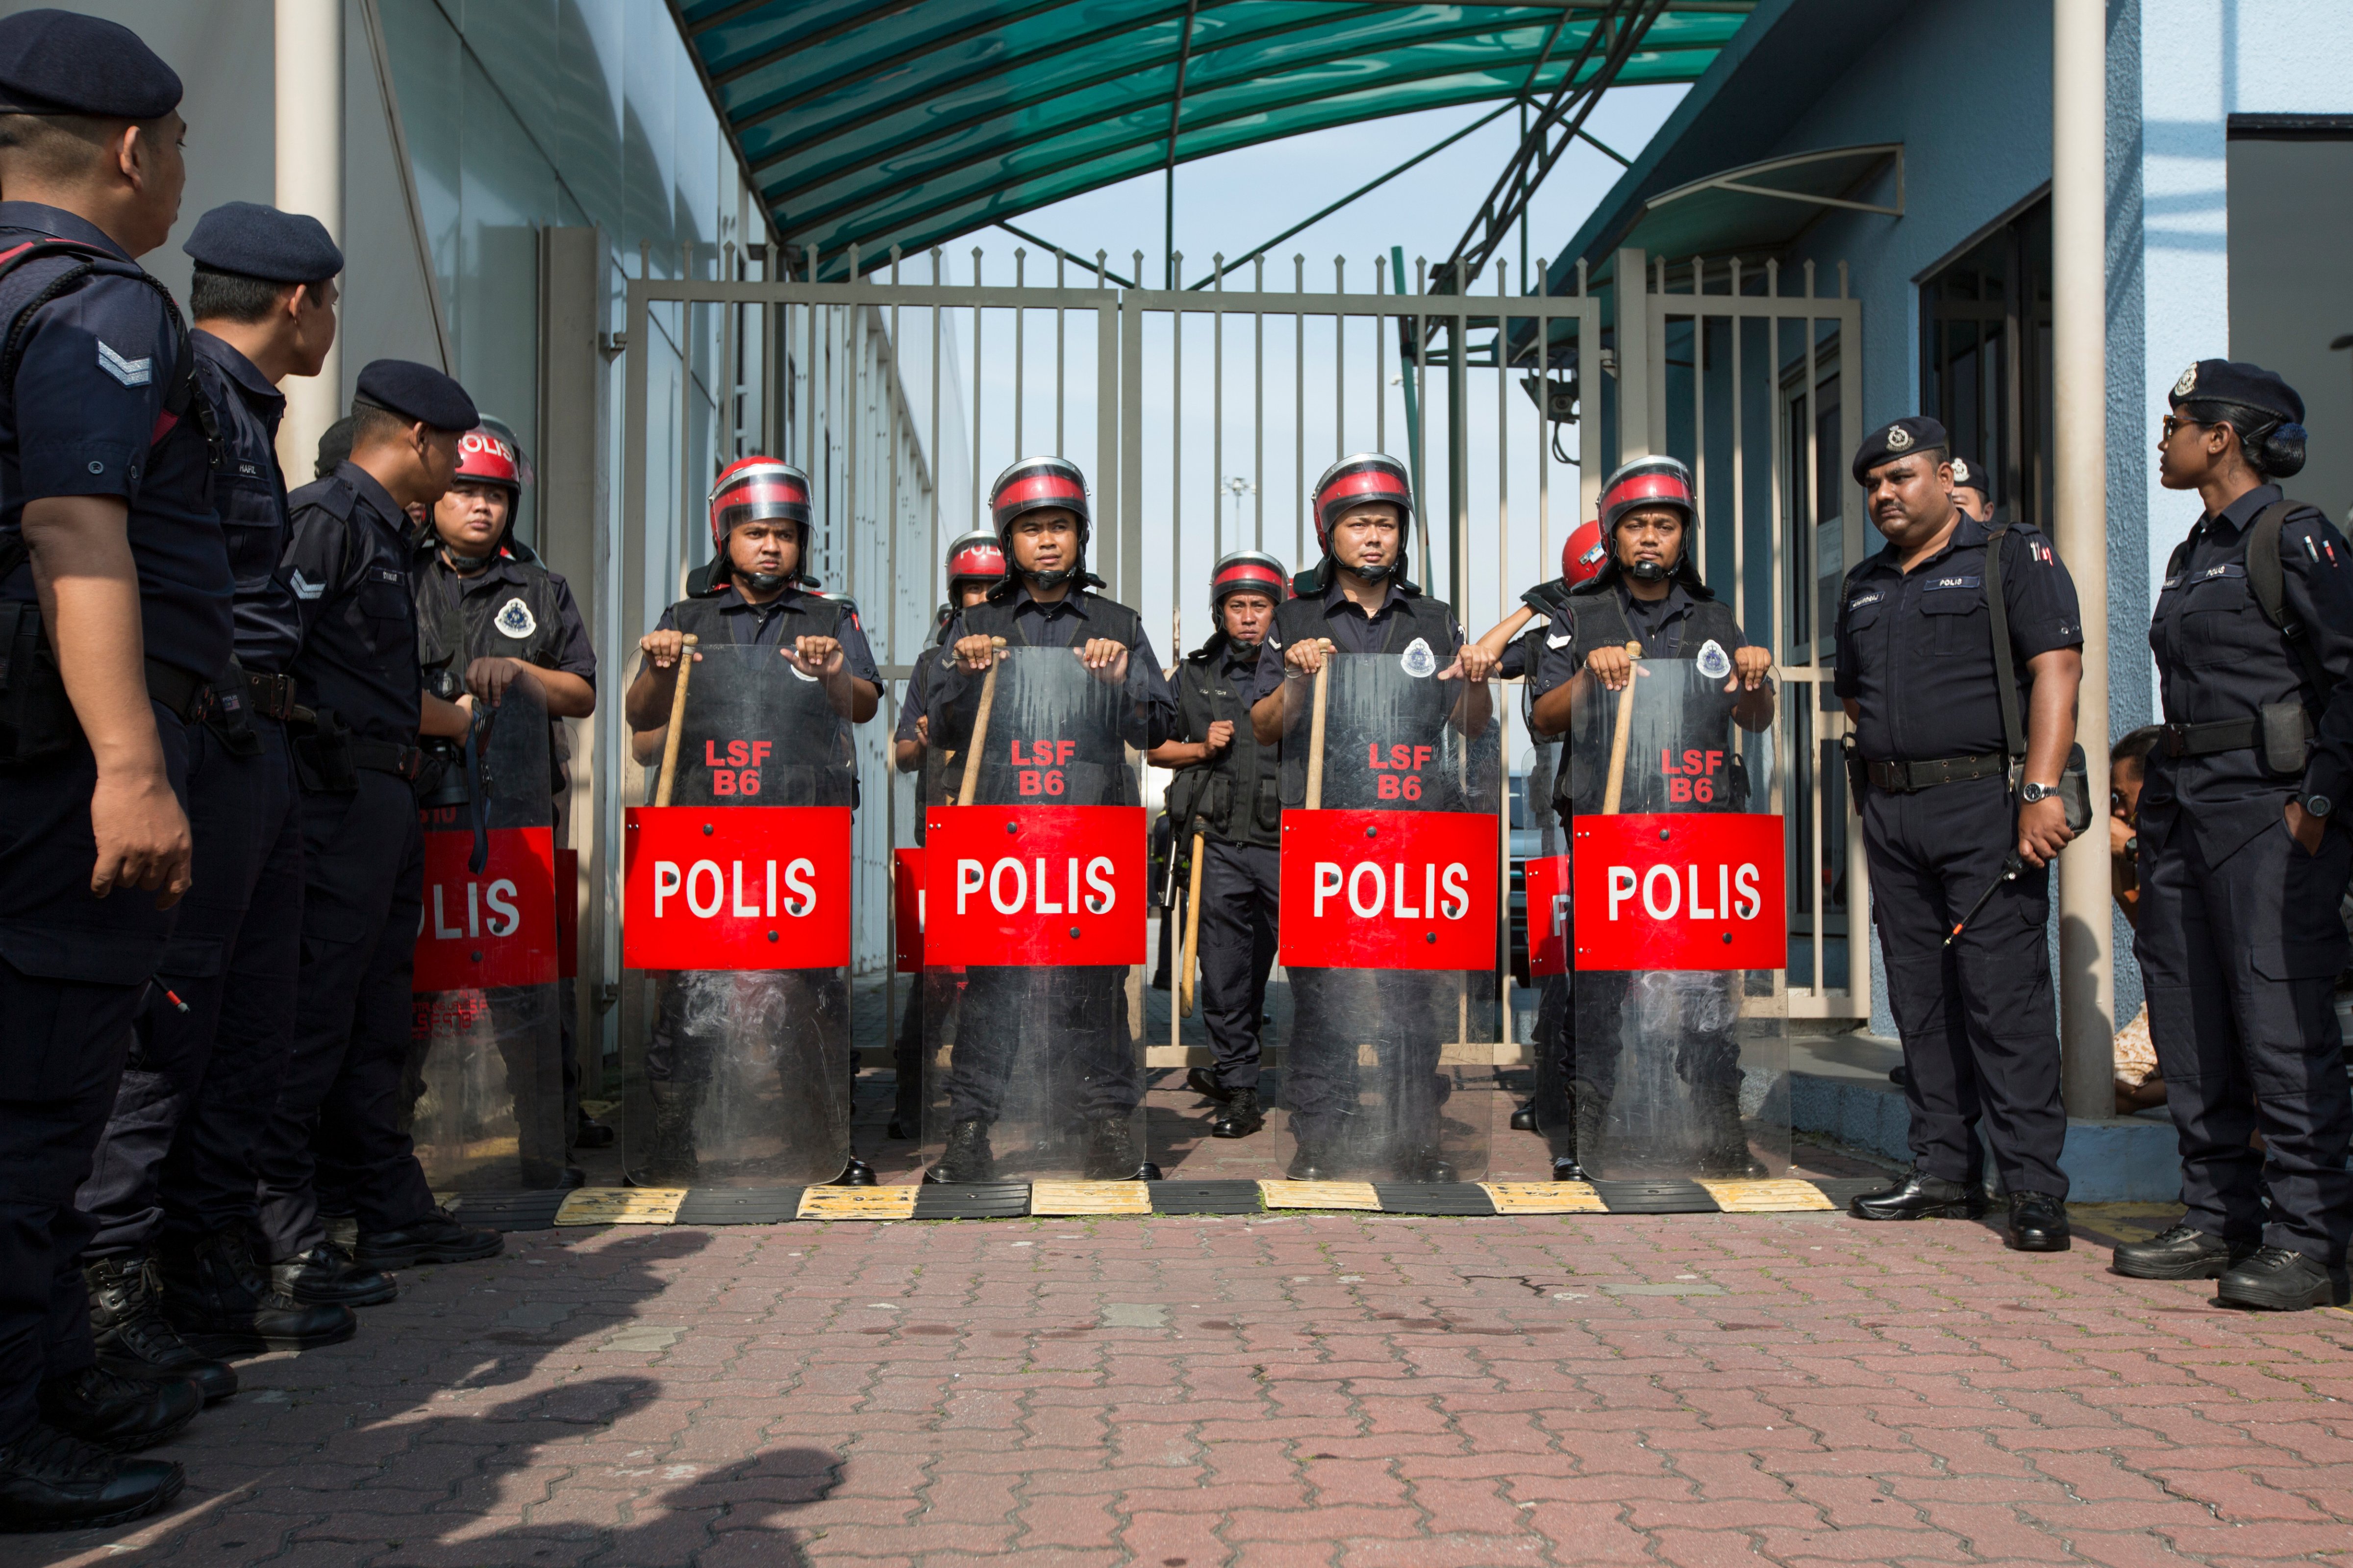 Special Police forces are deployed at an airport outside Kuala Lumpur on May 12, 2018. (Alexandra Radu&mdash;SOPA Images/LightRocket/Getty Images)